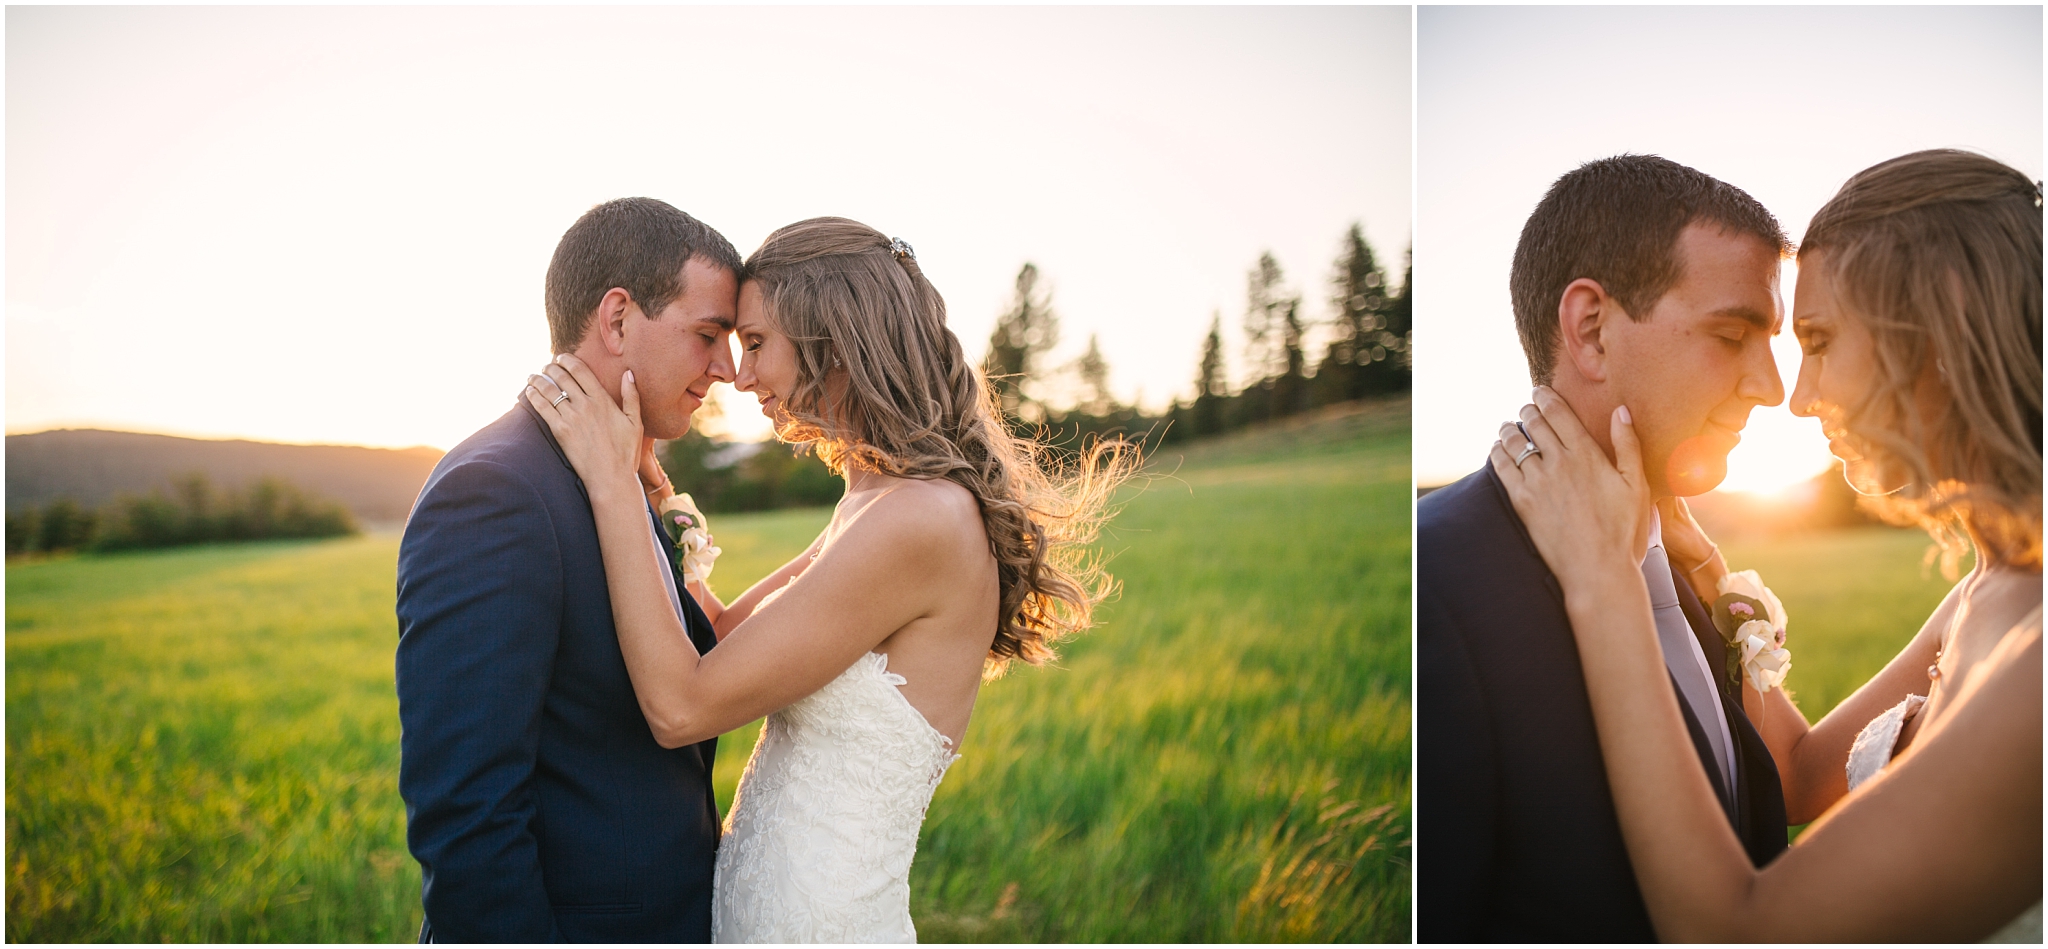 Bride and groom touching foreheads at golden hour in a field in Cle Elum Washington